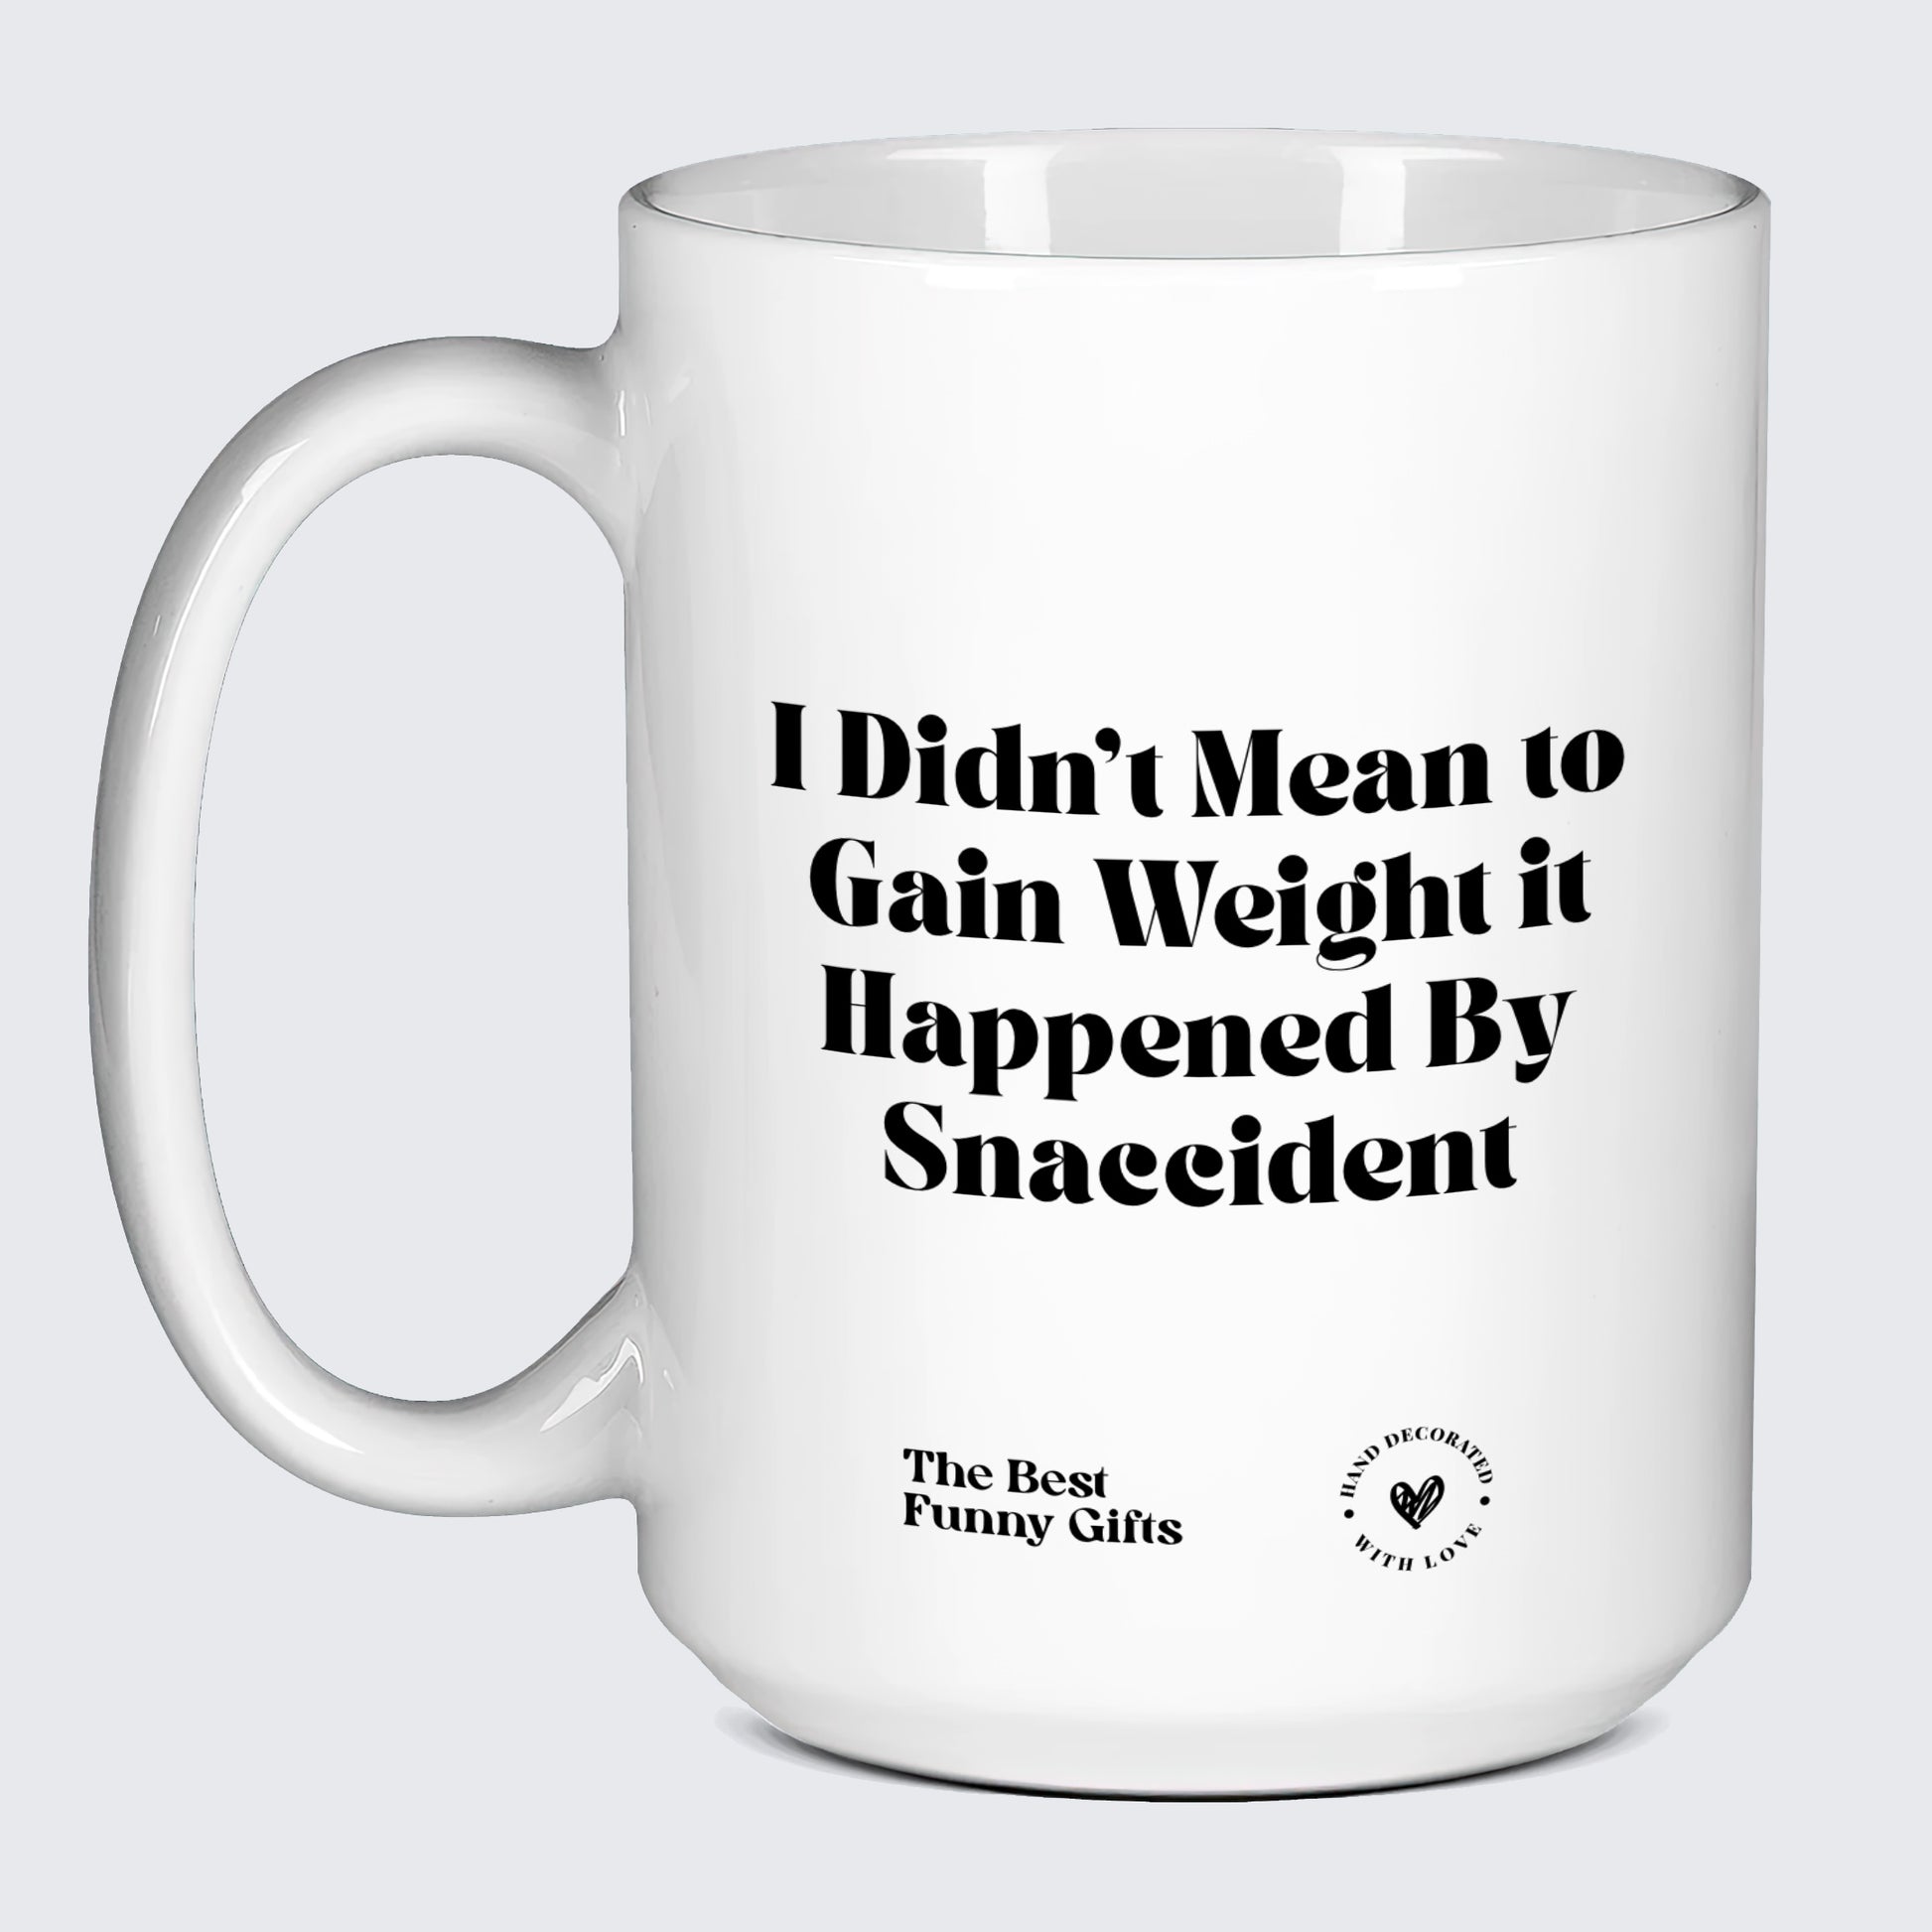 Funny Mugs - I Didn't Mean to Gain Weight It Happened by Snaccident - Coffee Mug